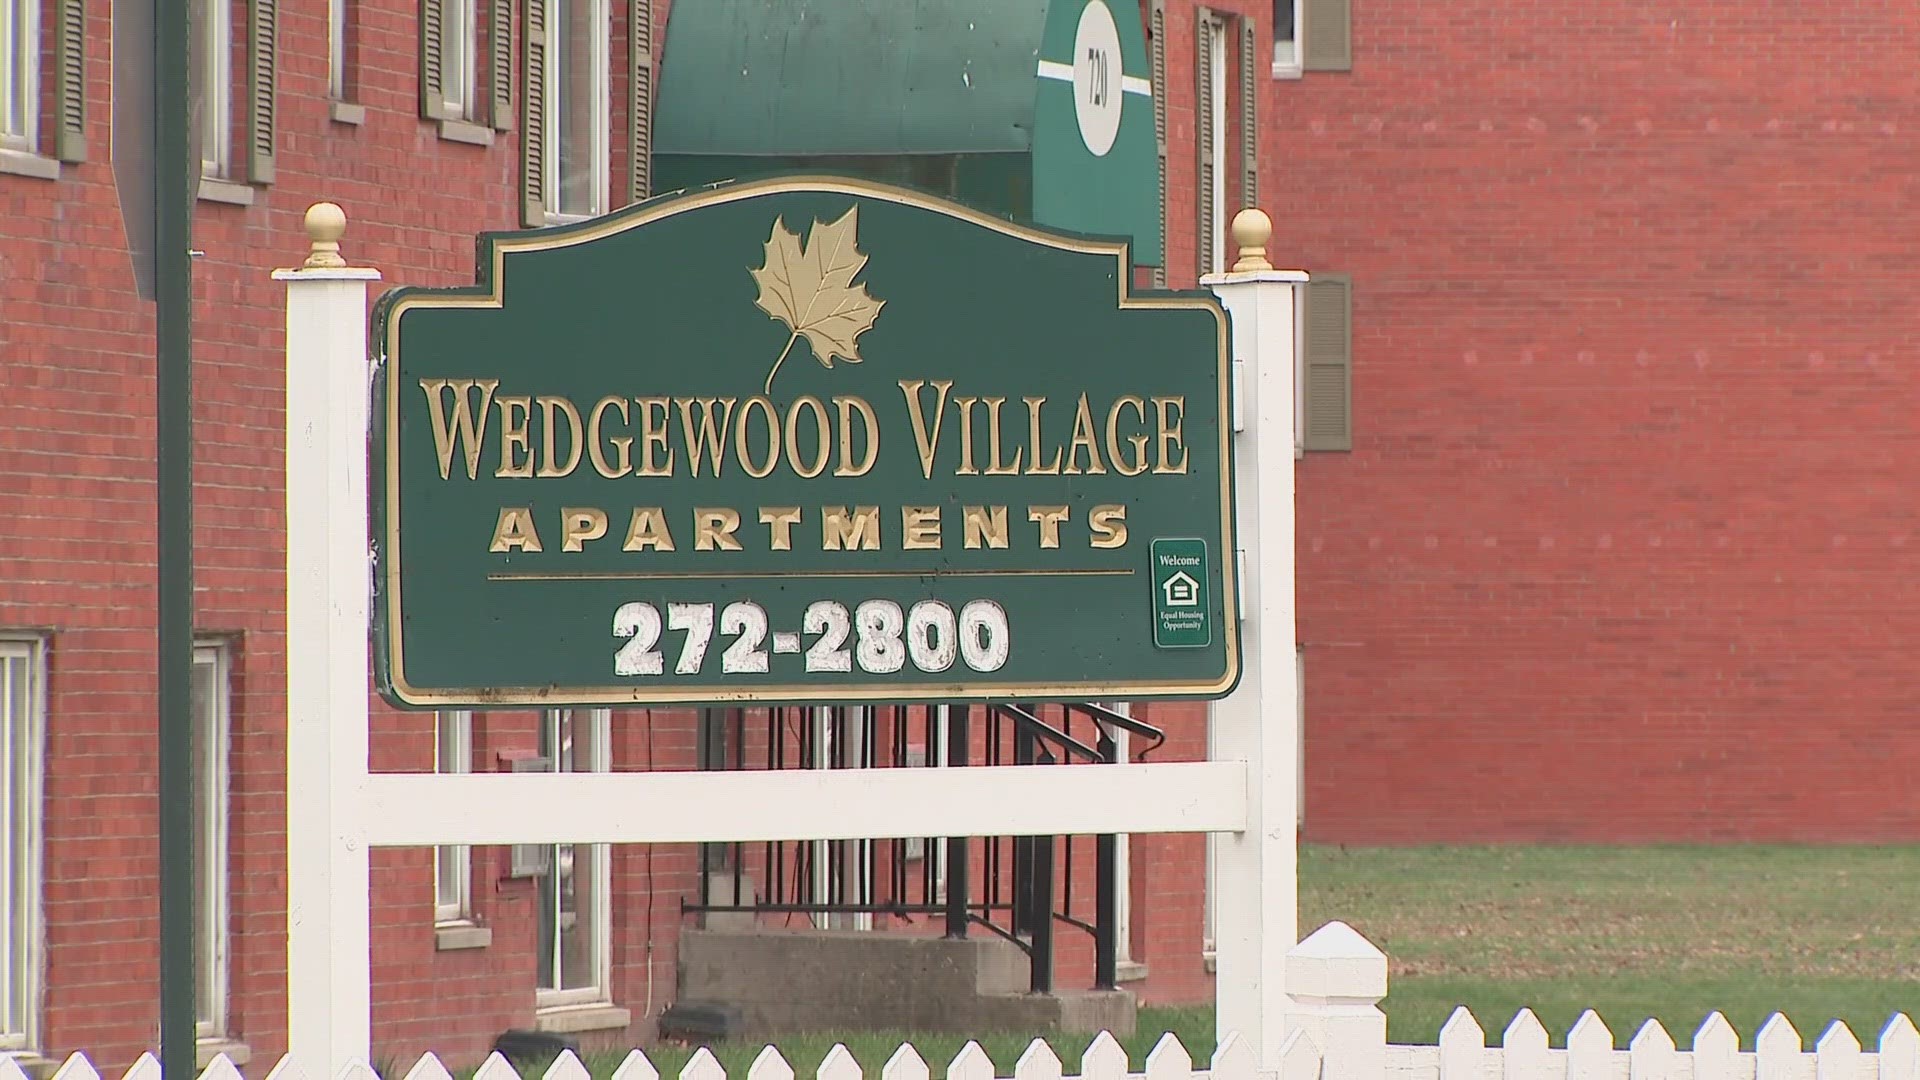 A Wedgewood resident reported they have issues with mice, cockroaches and bed bugs. On top of that, they went days without hot water.